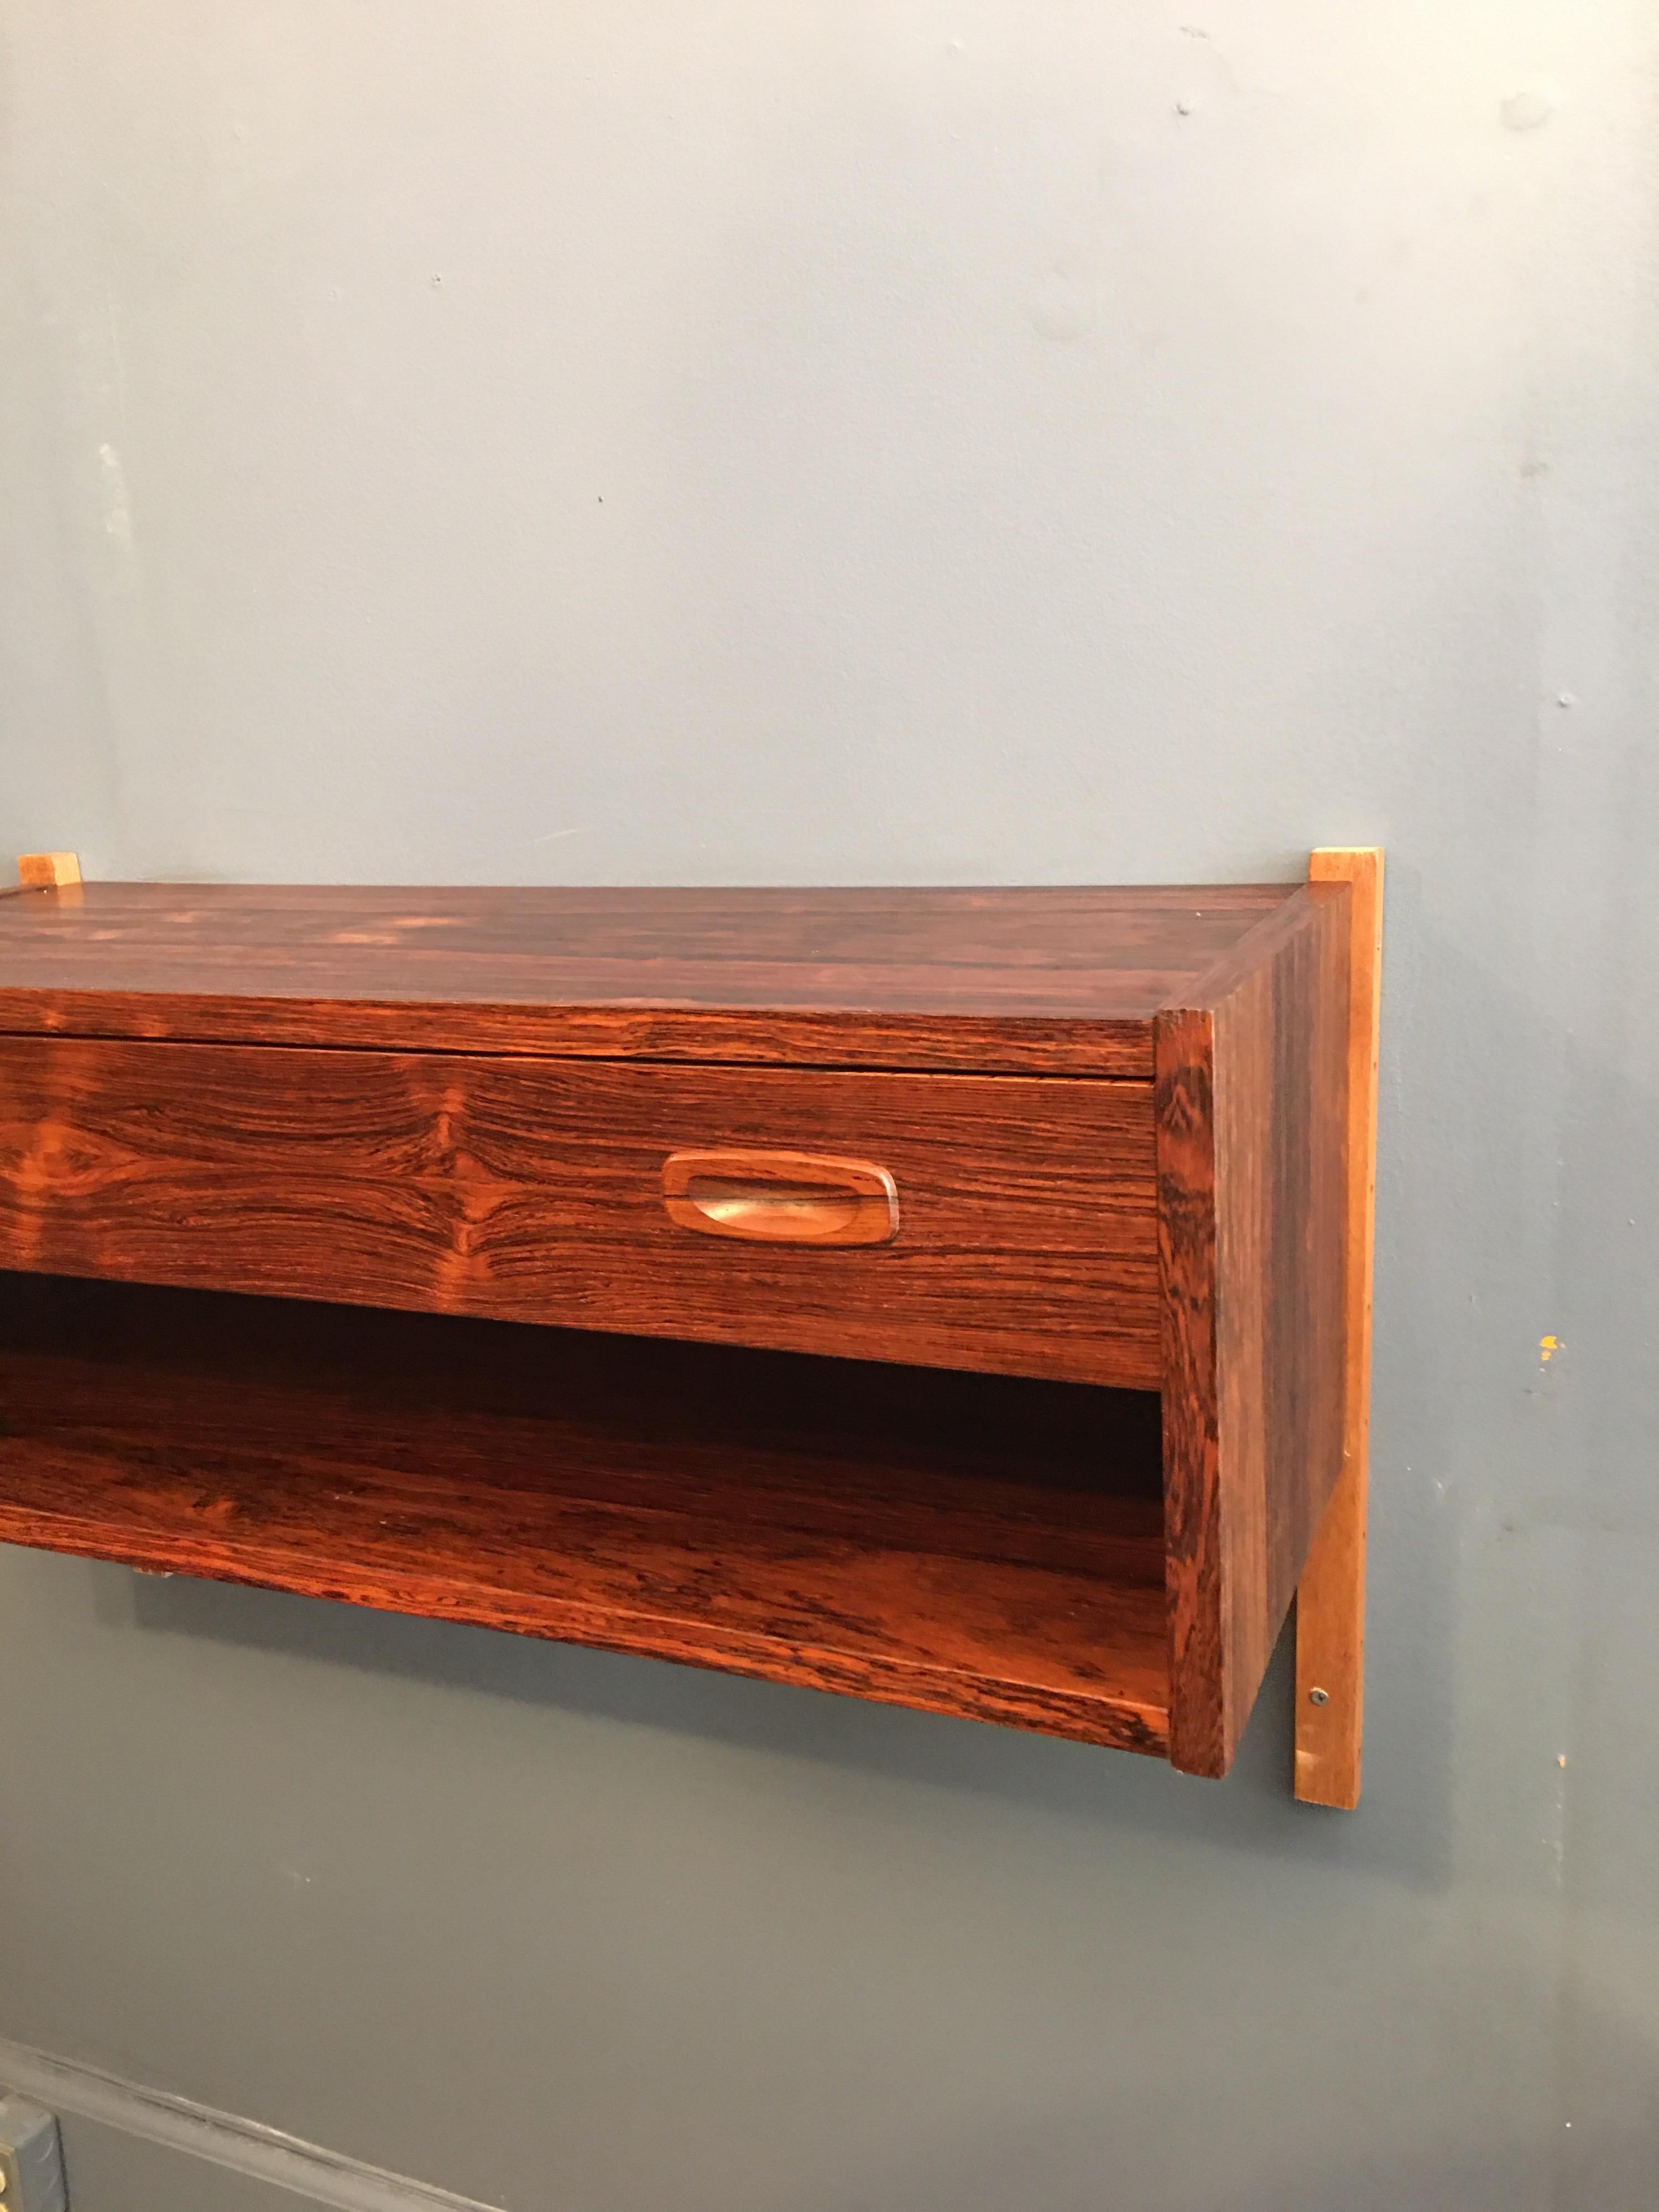 Great size and scale. One pullout / pull-out drawer and open space below. Perfect to use in an entrance or small space! Rosewood is very clean.